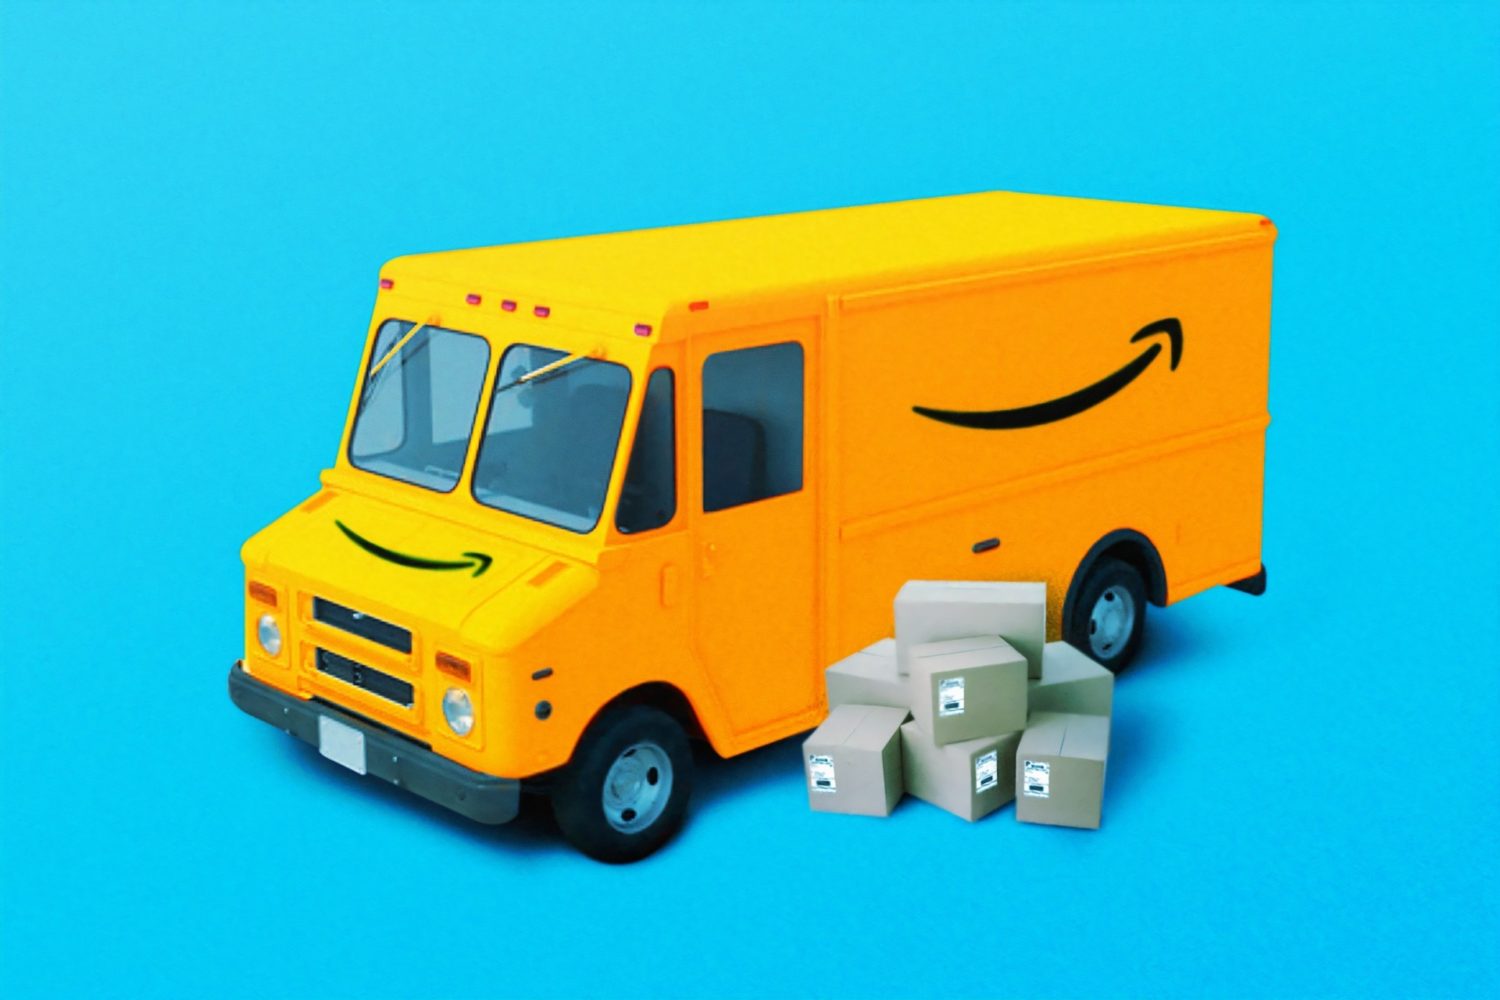 Tips for increasing Amazon sales